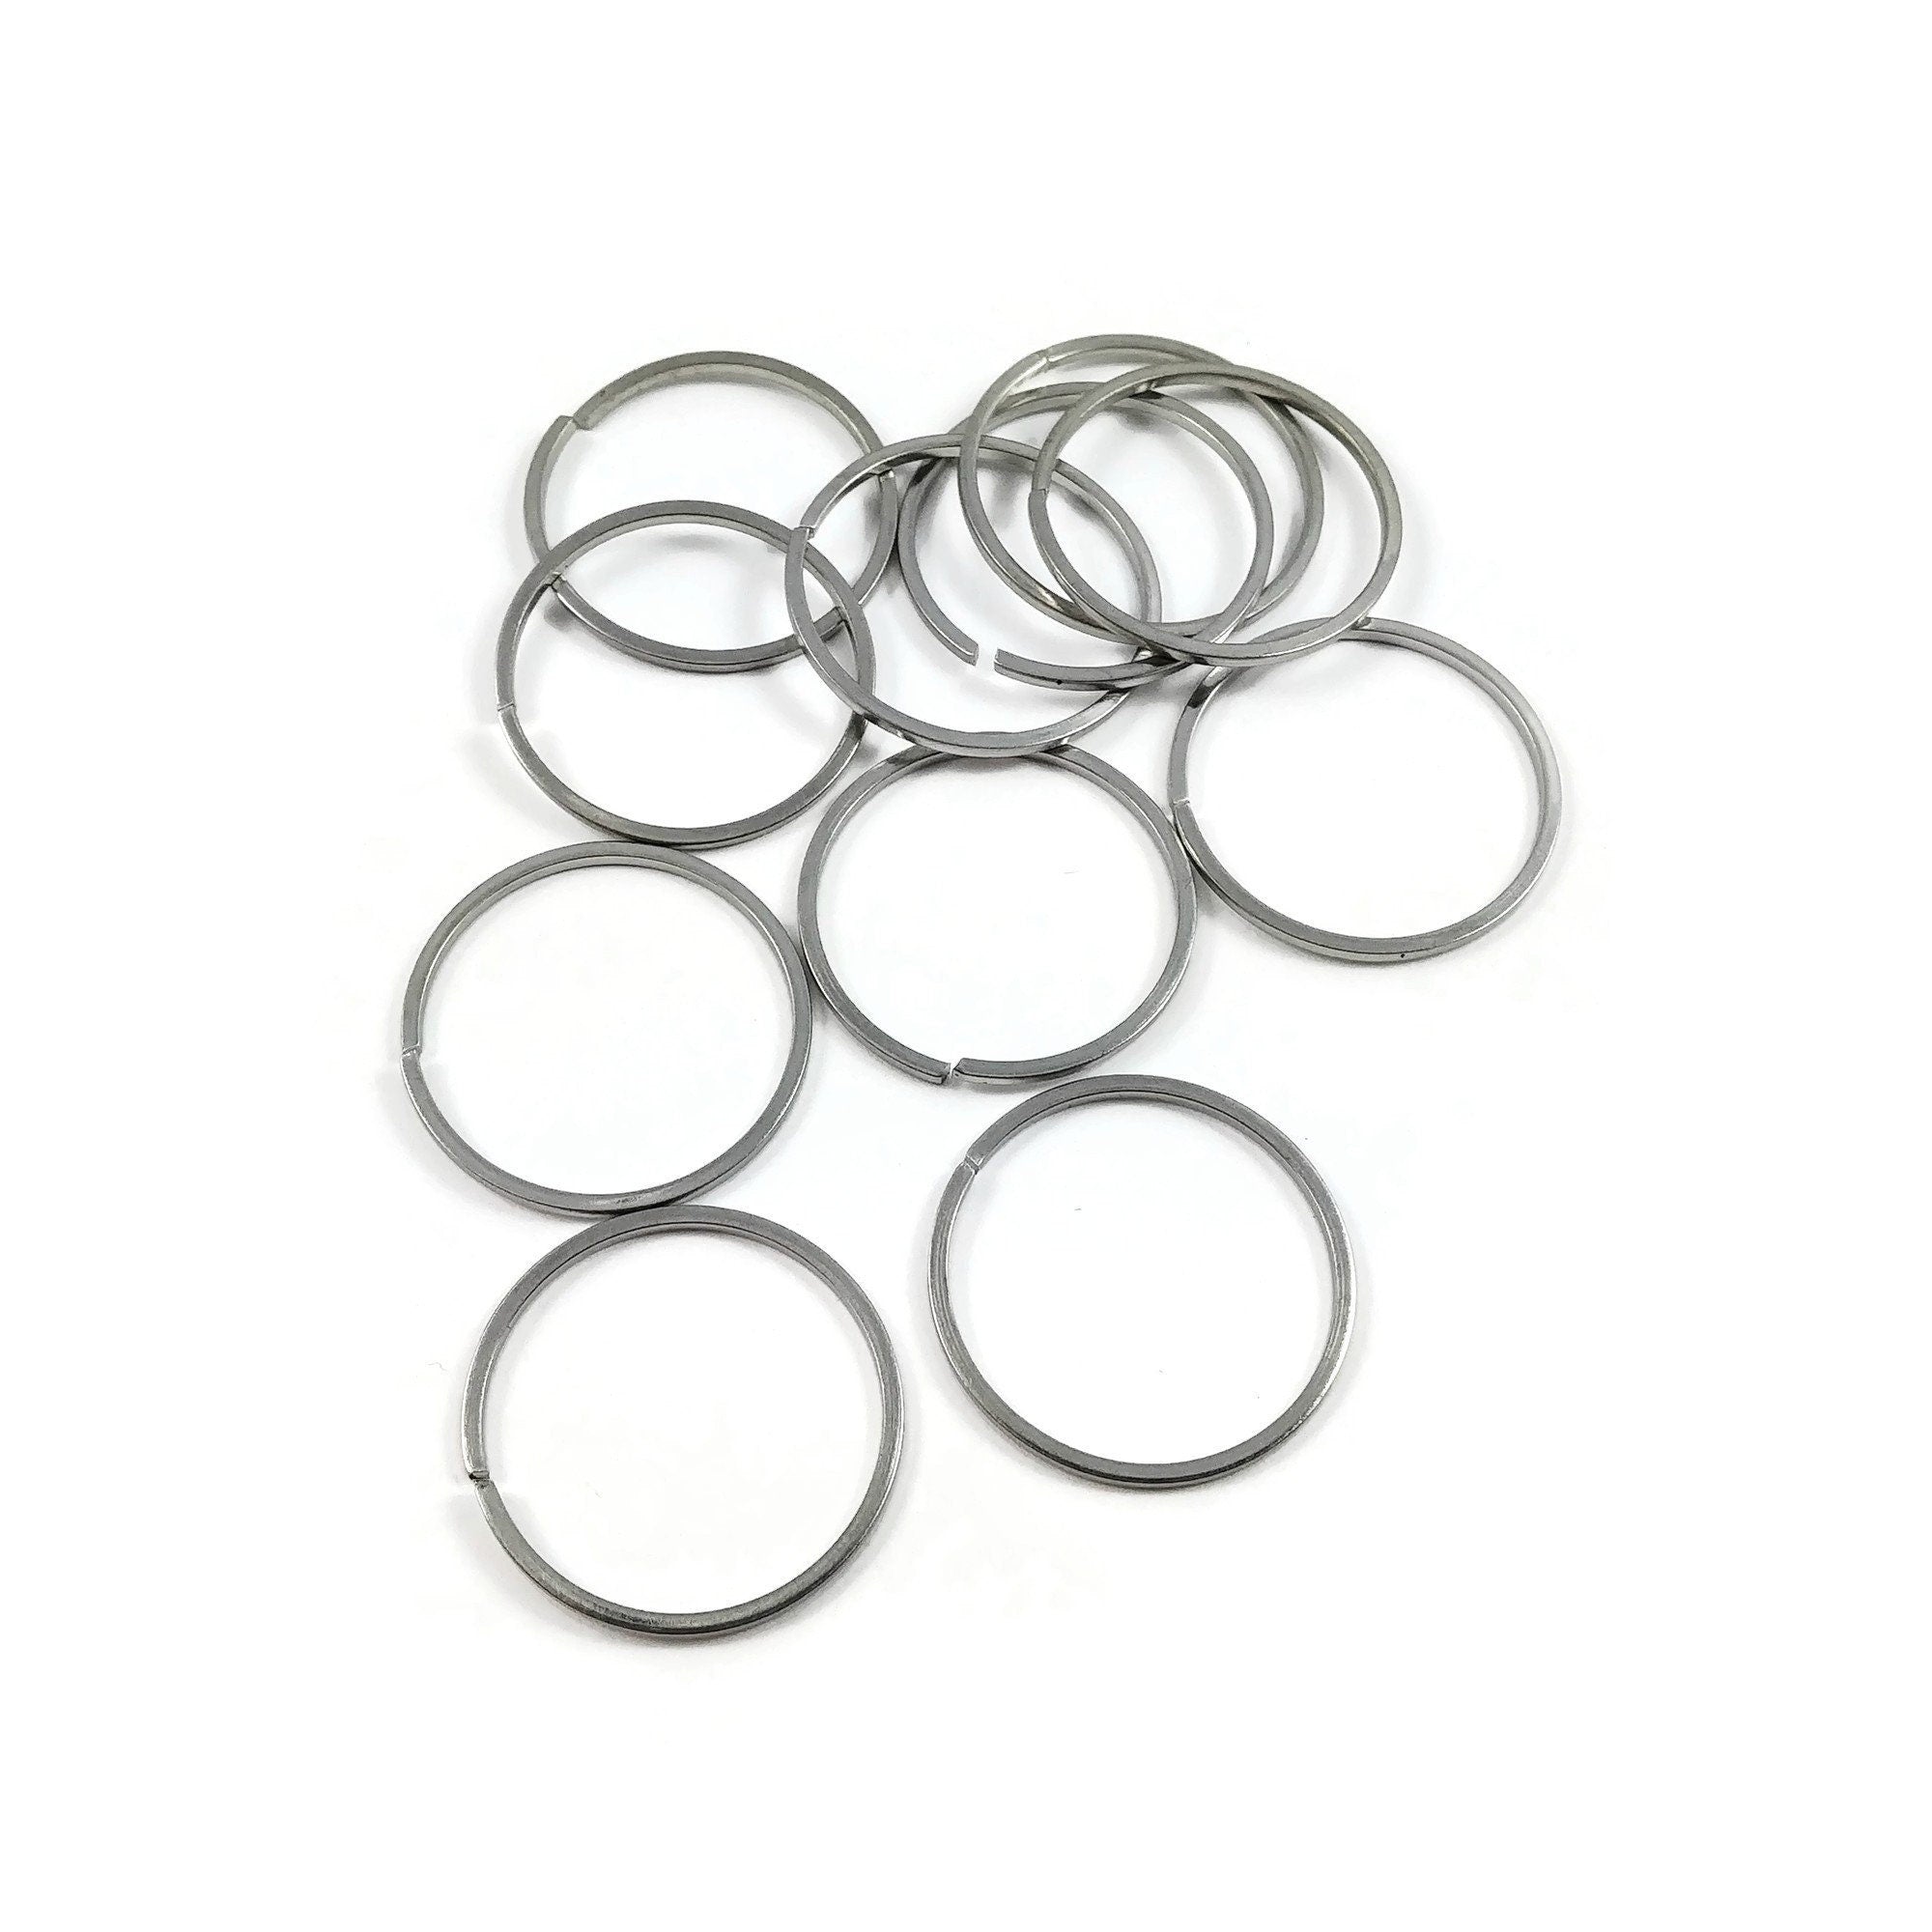 100Pcs Open Jump Rings 20Mm Nickel Jewelry Connectors for Jewelry